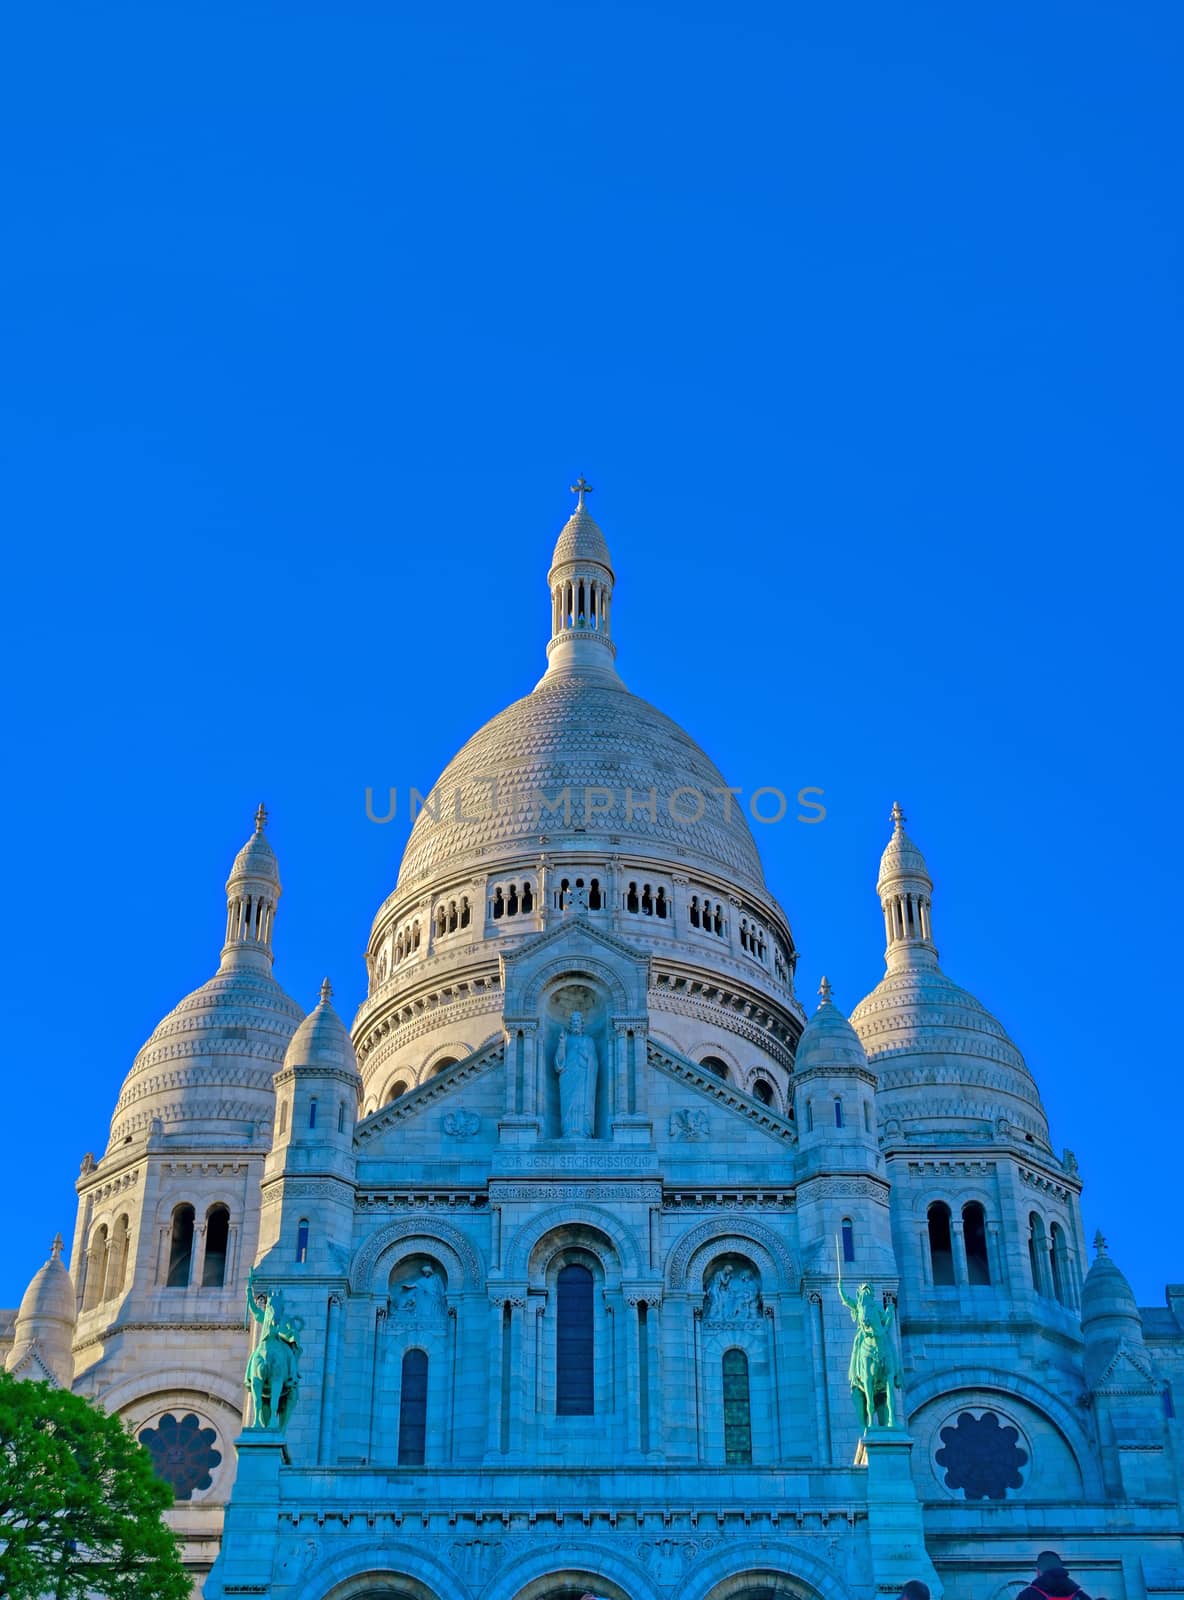 The Basilica of the Sacred Heart of Paris, located in the Montmartre district of Paris, France.